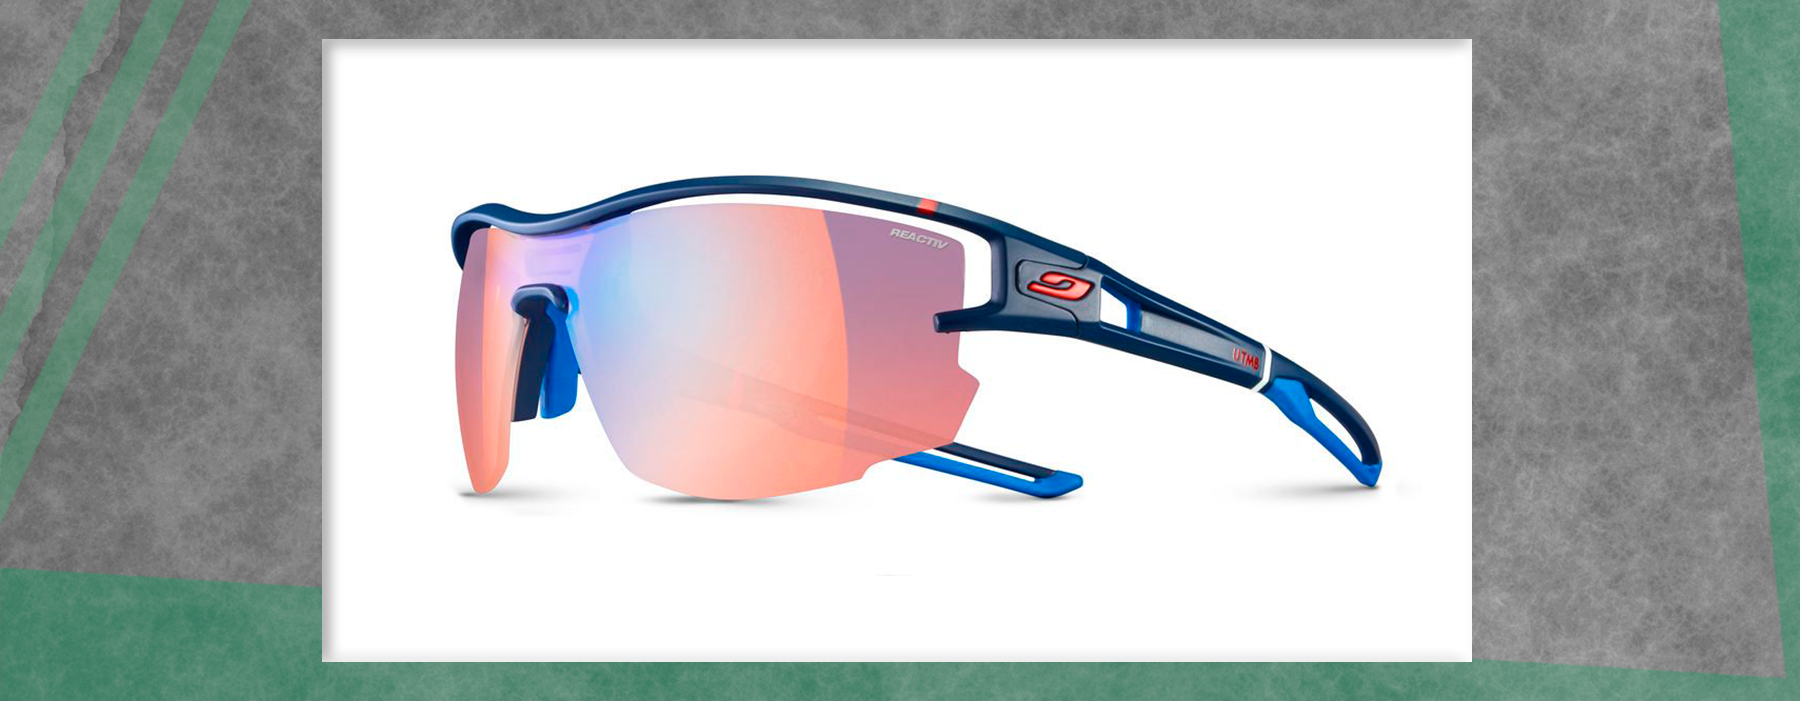 Picture Brillengestell Julbo Modell 3